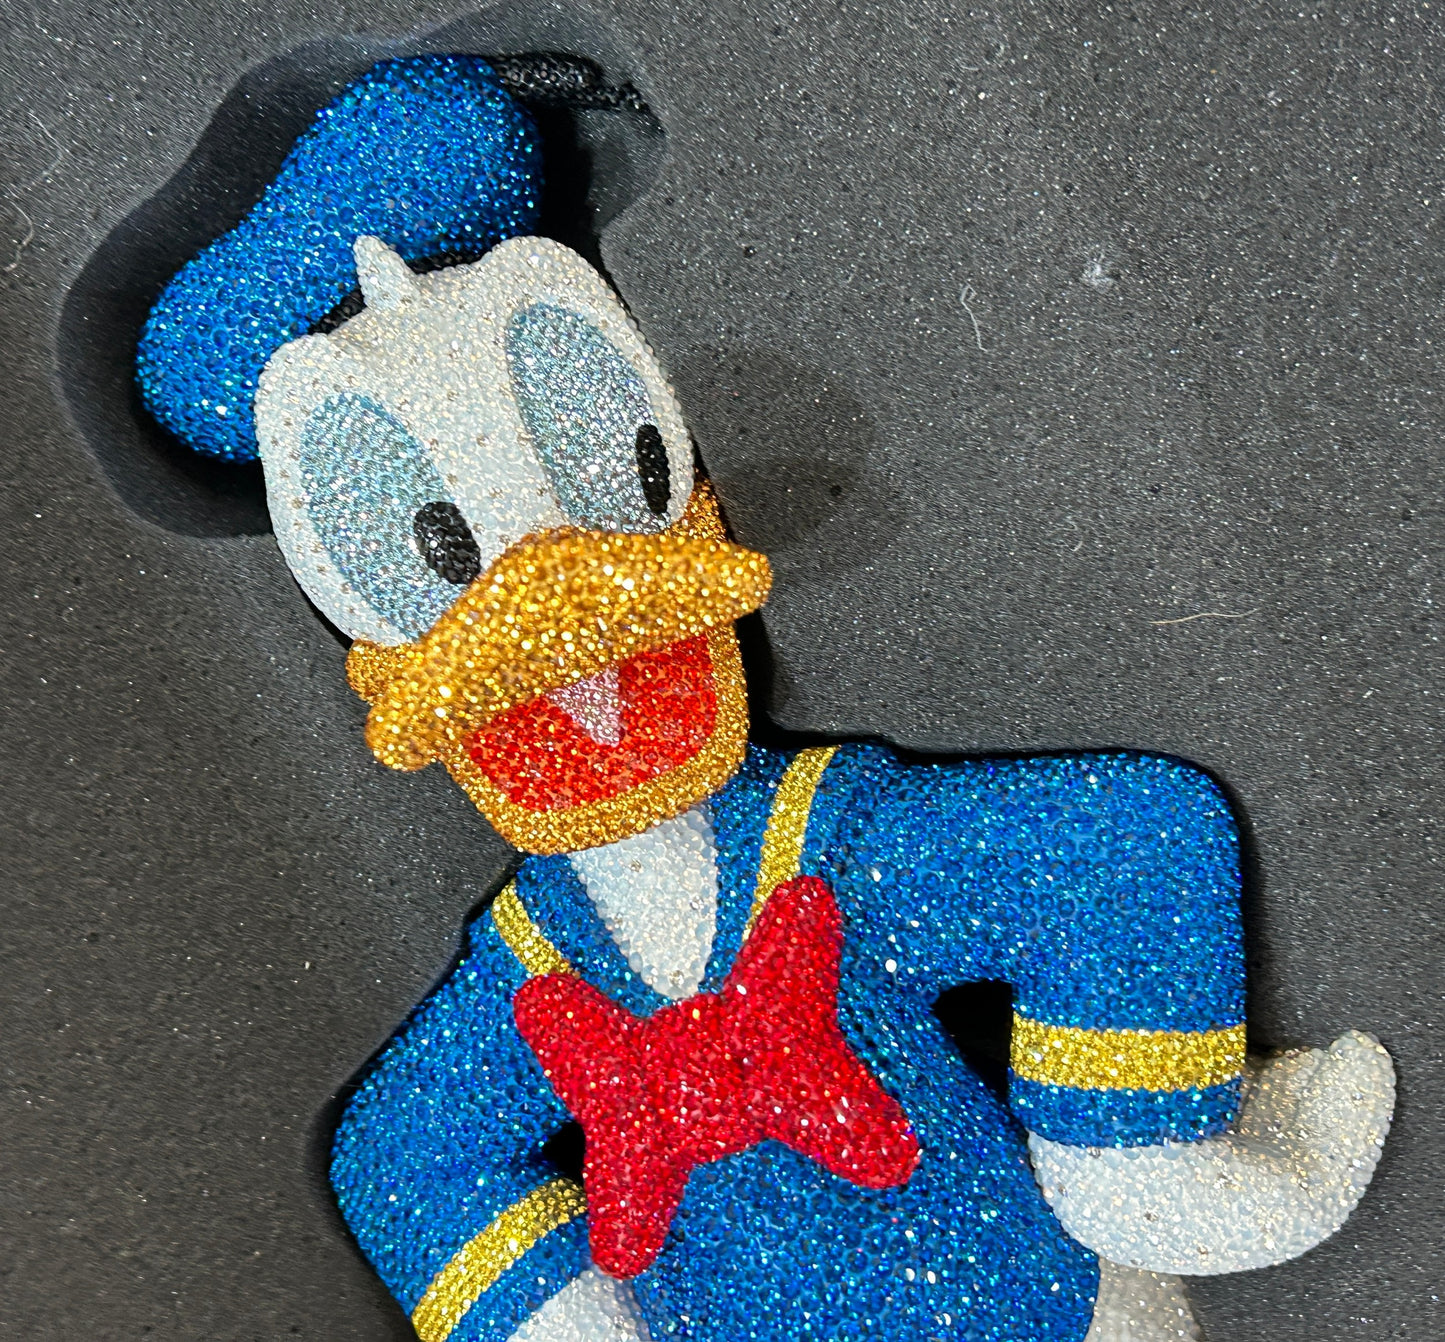 Disney Myriad Donald Duck Limited Edition #12 out of 150 pieces Made